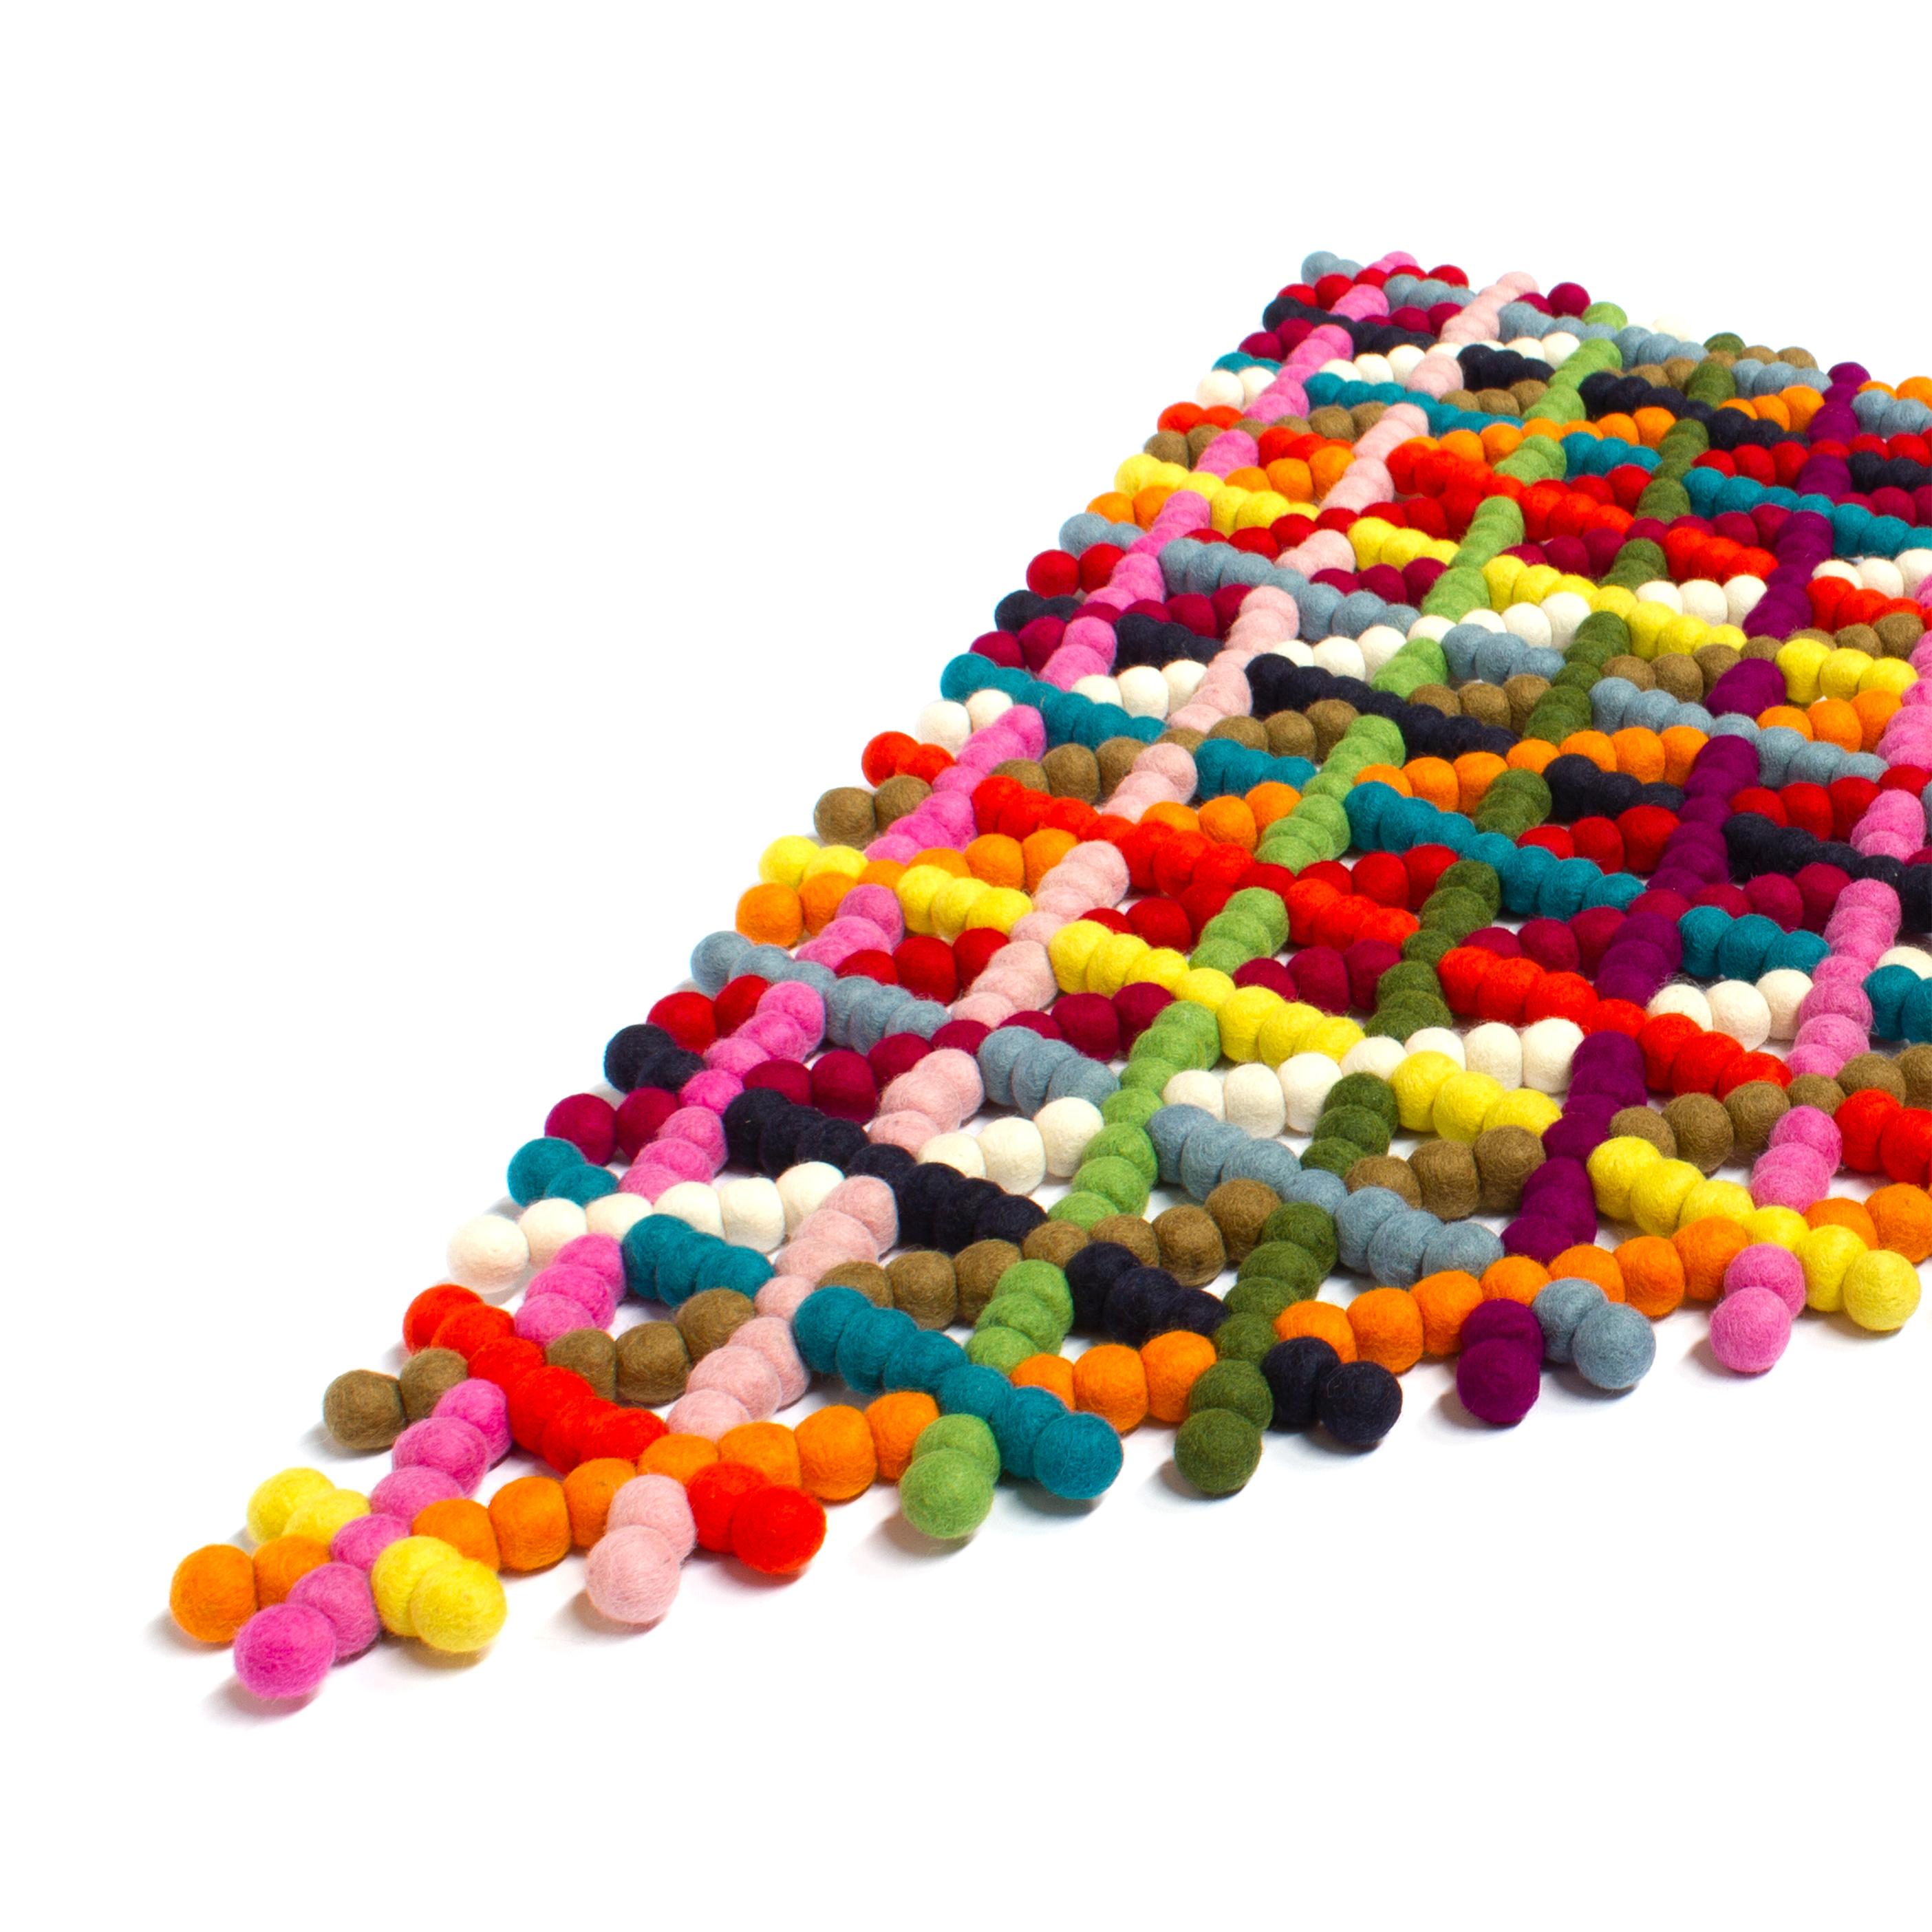 Hand-Crafted Contemporary Colorful One of a kind Wool Felt Rug  For Sale